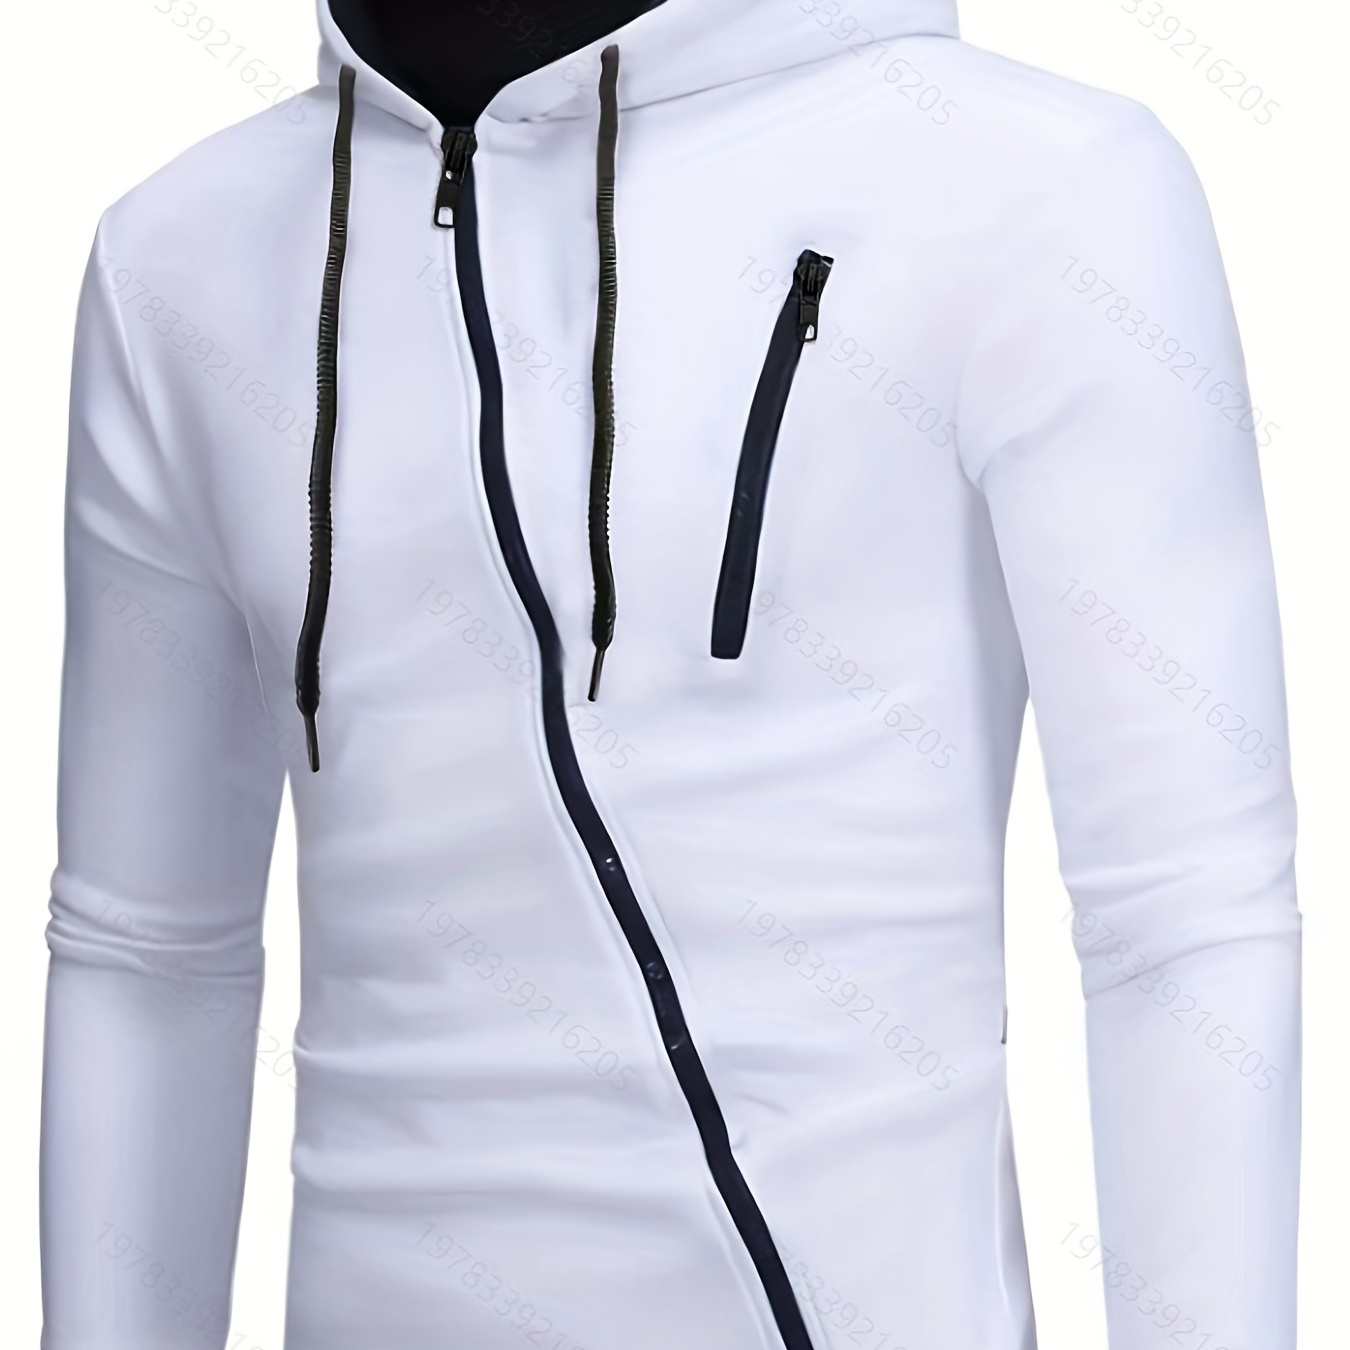 

Asymmetrical Zippers Design Hooded Jacket With Zipper Pockets, Men's Casual Solid Mid Stretch Zip Up Drawstring Hoodie Coat For Spring Fall